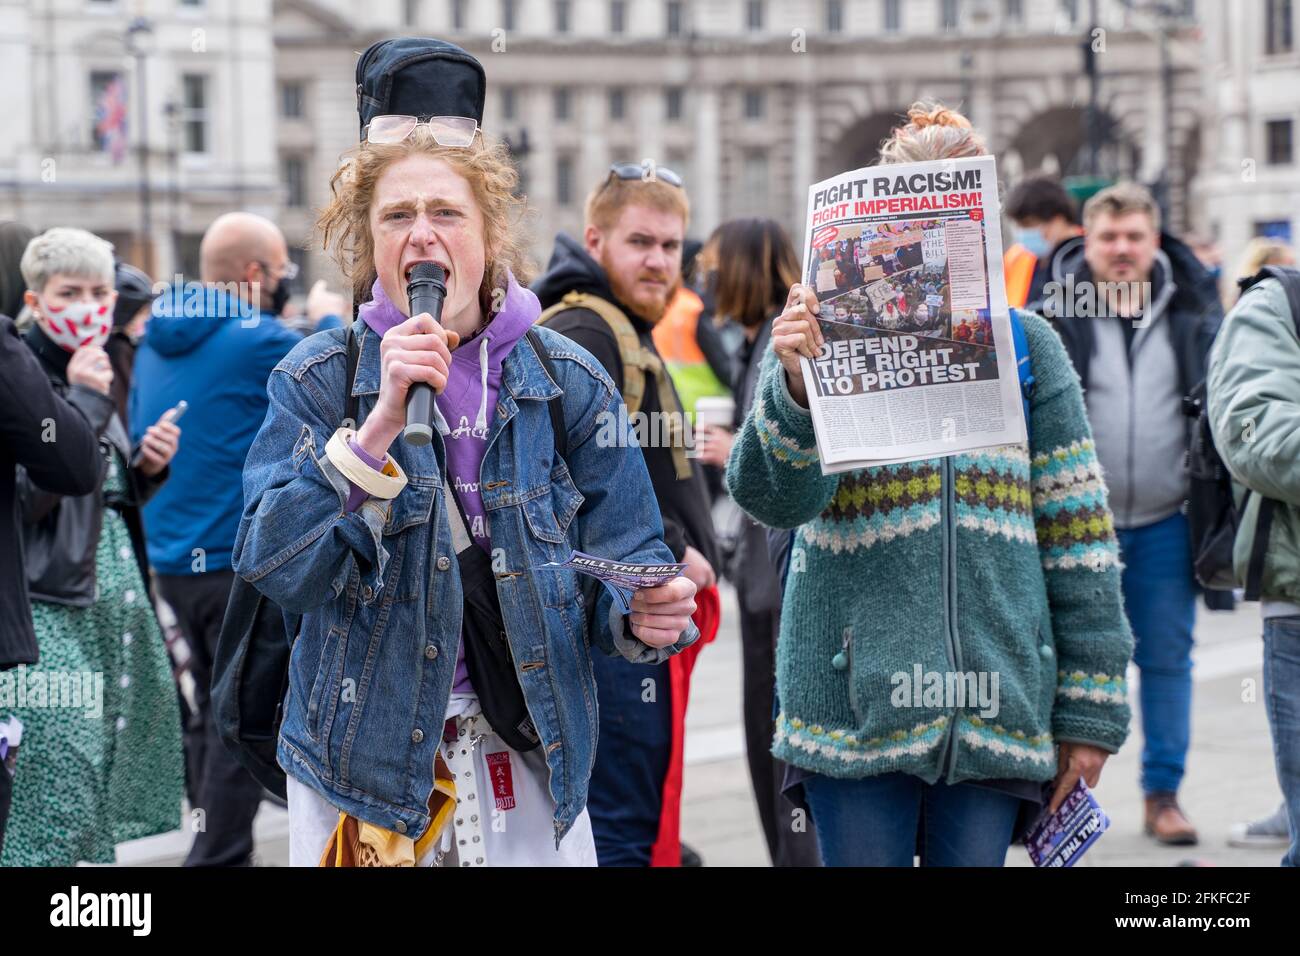 Man shouting into microphone at a Kill The Bill protest in London's Trafalgar Square, protesting about police powers and ending racism. Stock Photo